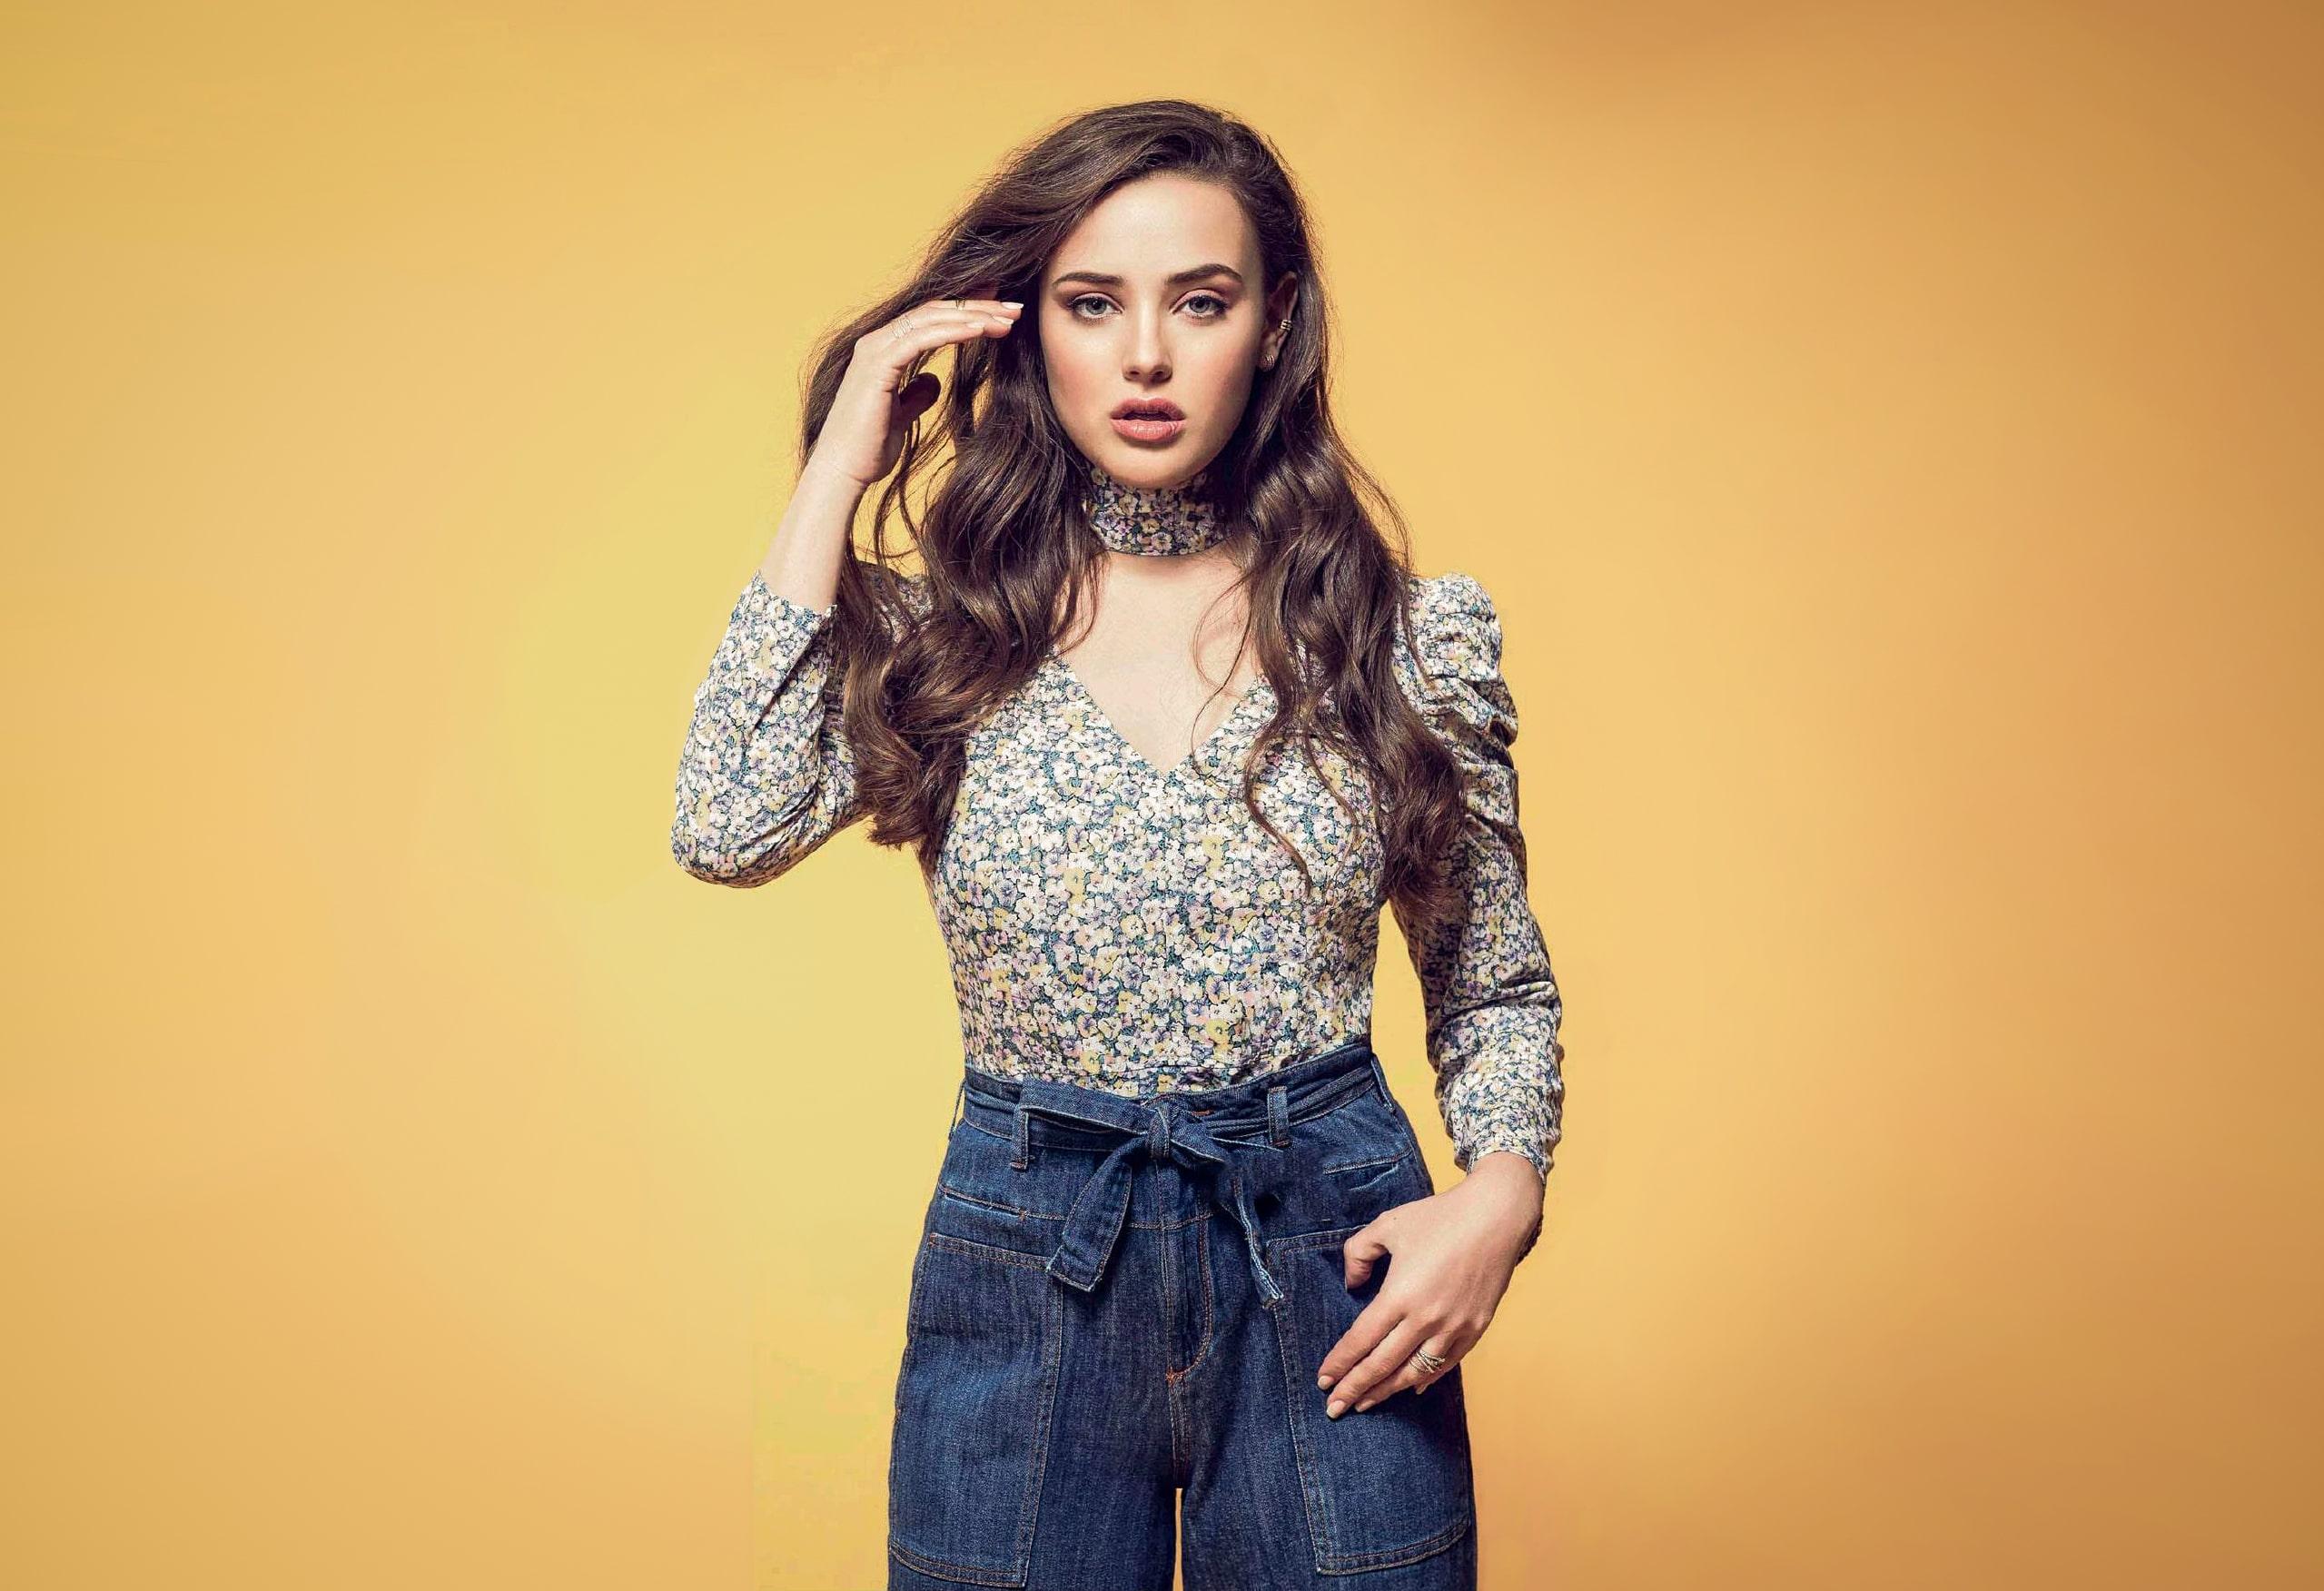 61 Hottest Katherine Langford Butt Pictures Are Too Damn Delicious To Watch | Best Of Comic Books